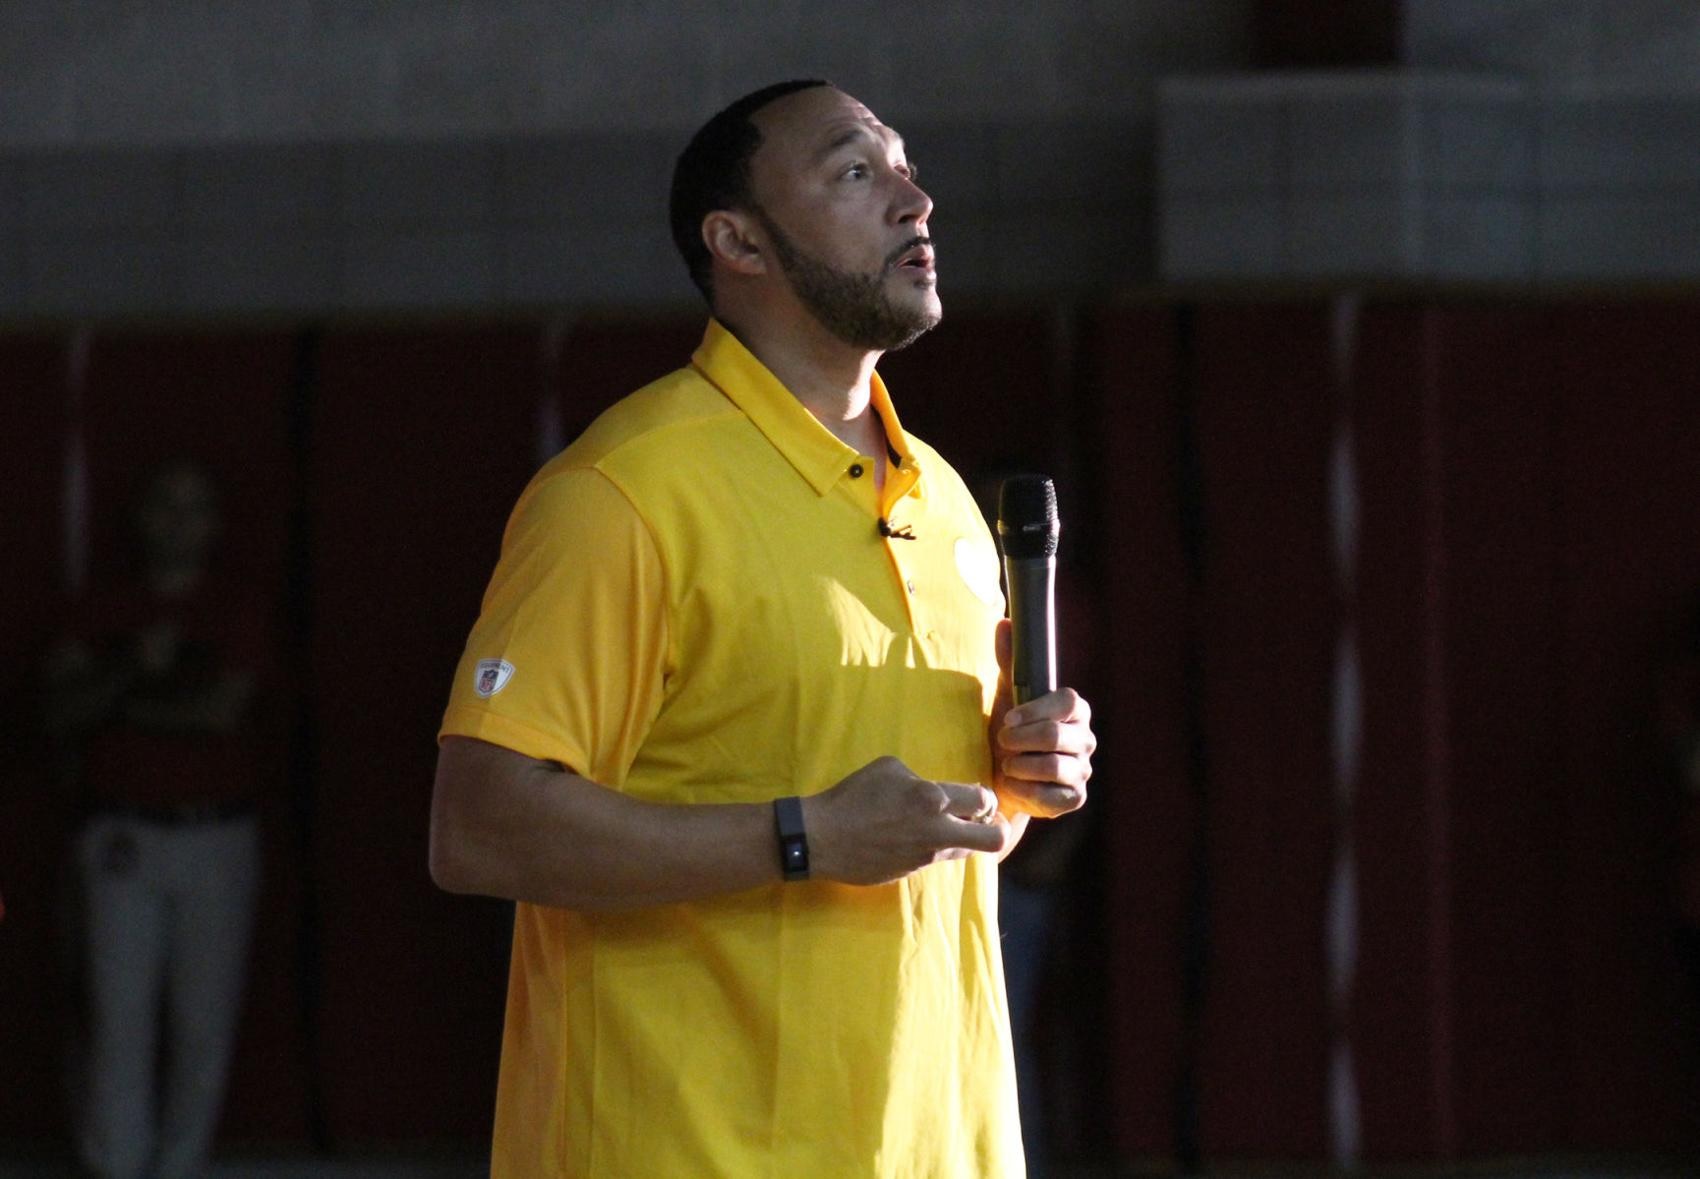 Charlie Batch delivering a motivational speech to Mohawk High School outside of Pittsburgh, PA